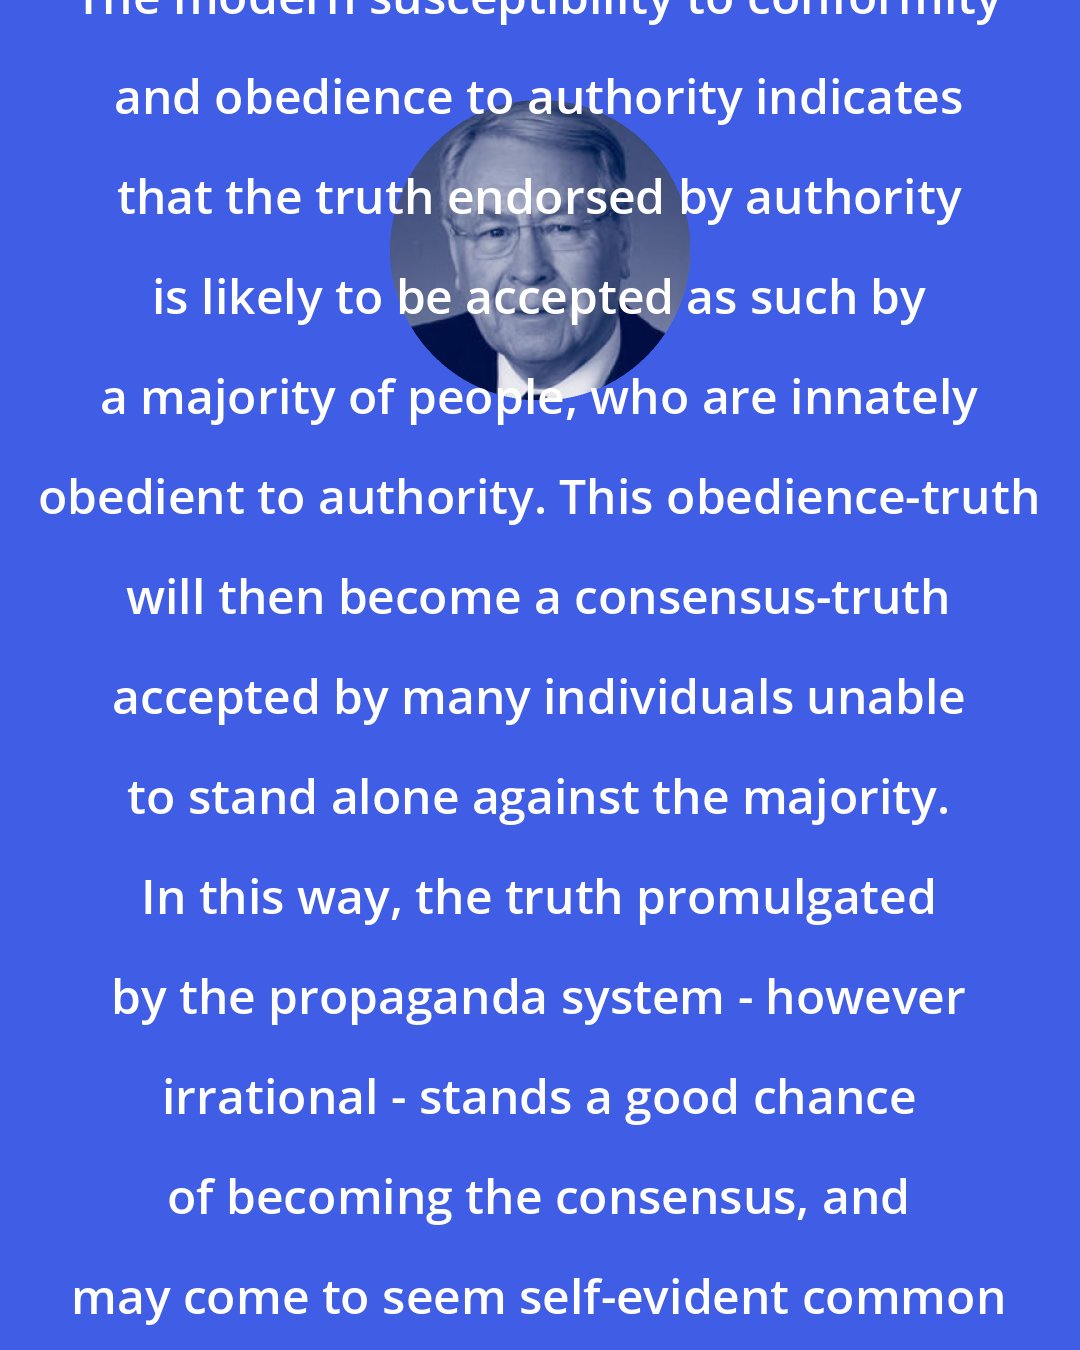 David Edward: The modern susceptibility to conformity and obedience to authority indicates that the truth endorsed by authority is likely to be accepted as such by a majority of people, who are innately obedient to authority. This obedience-truth will then become a consensus-truth accepted by many individuals unable to stand alone against the majority. In this way, the truth promulgated by the propaganda system - however irrational - stands a good chance of becoming the consensus, and may come to seem self-evident common sense.